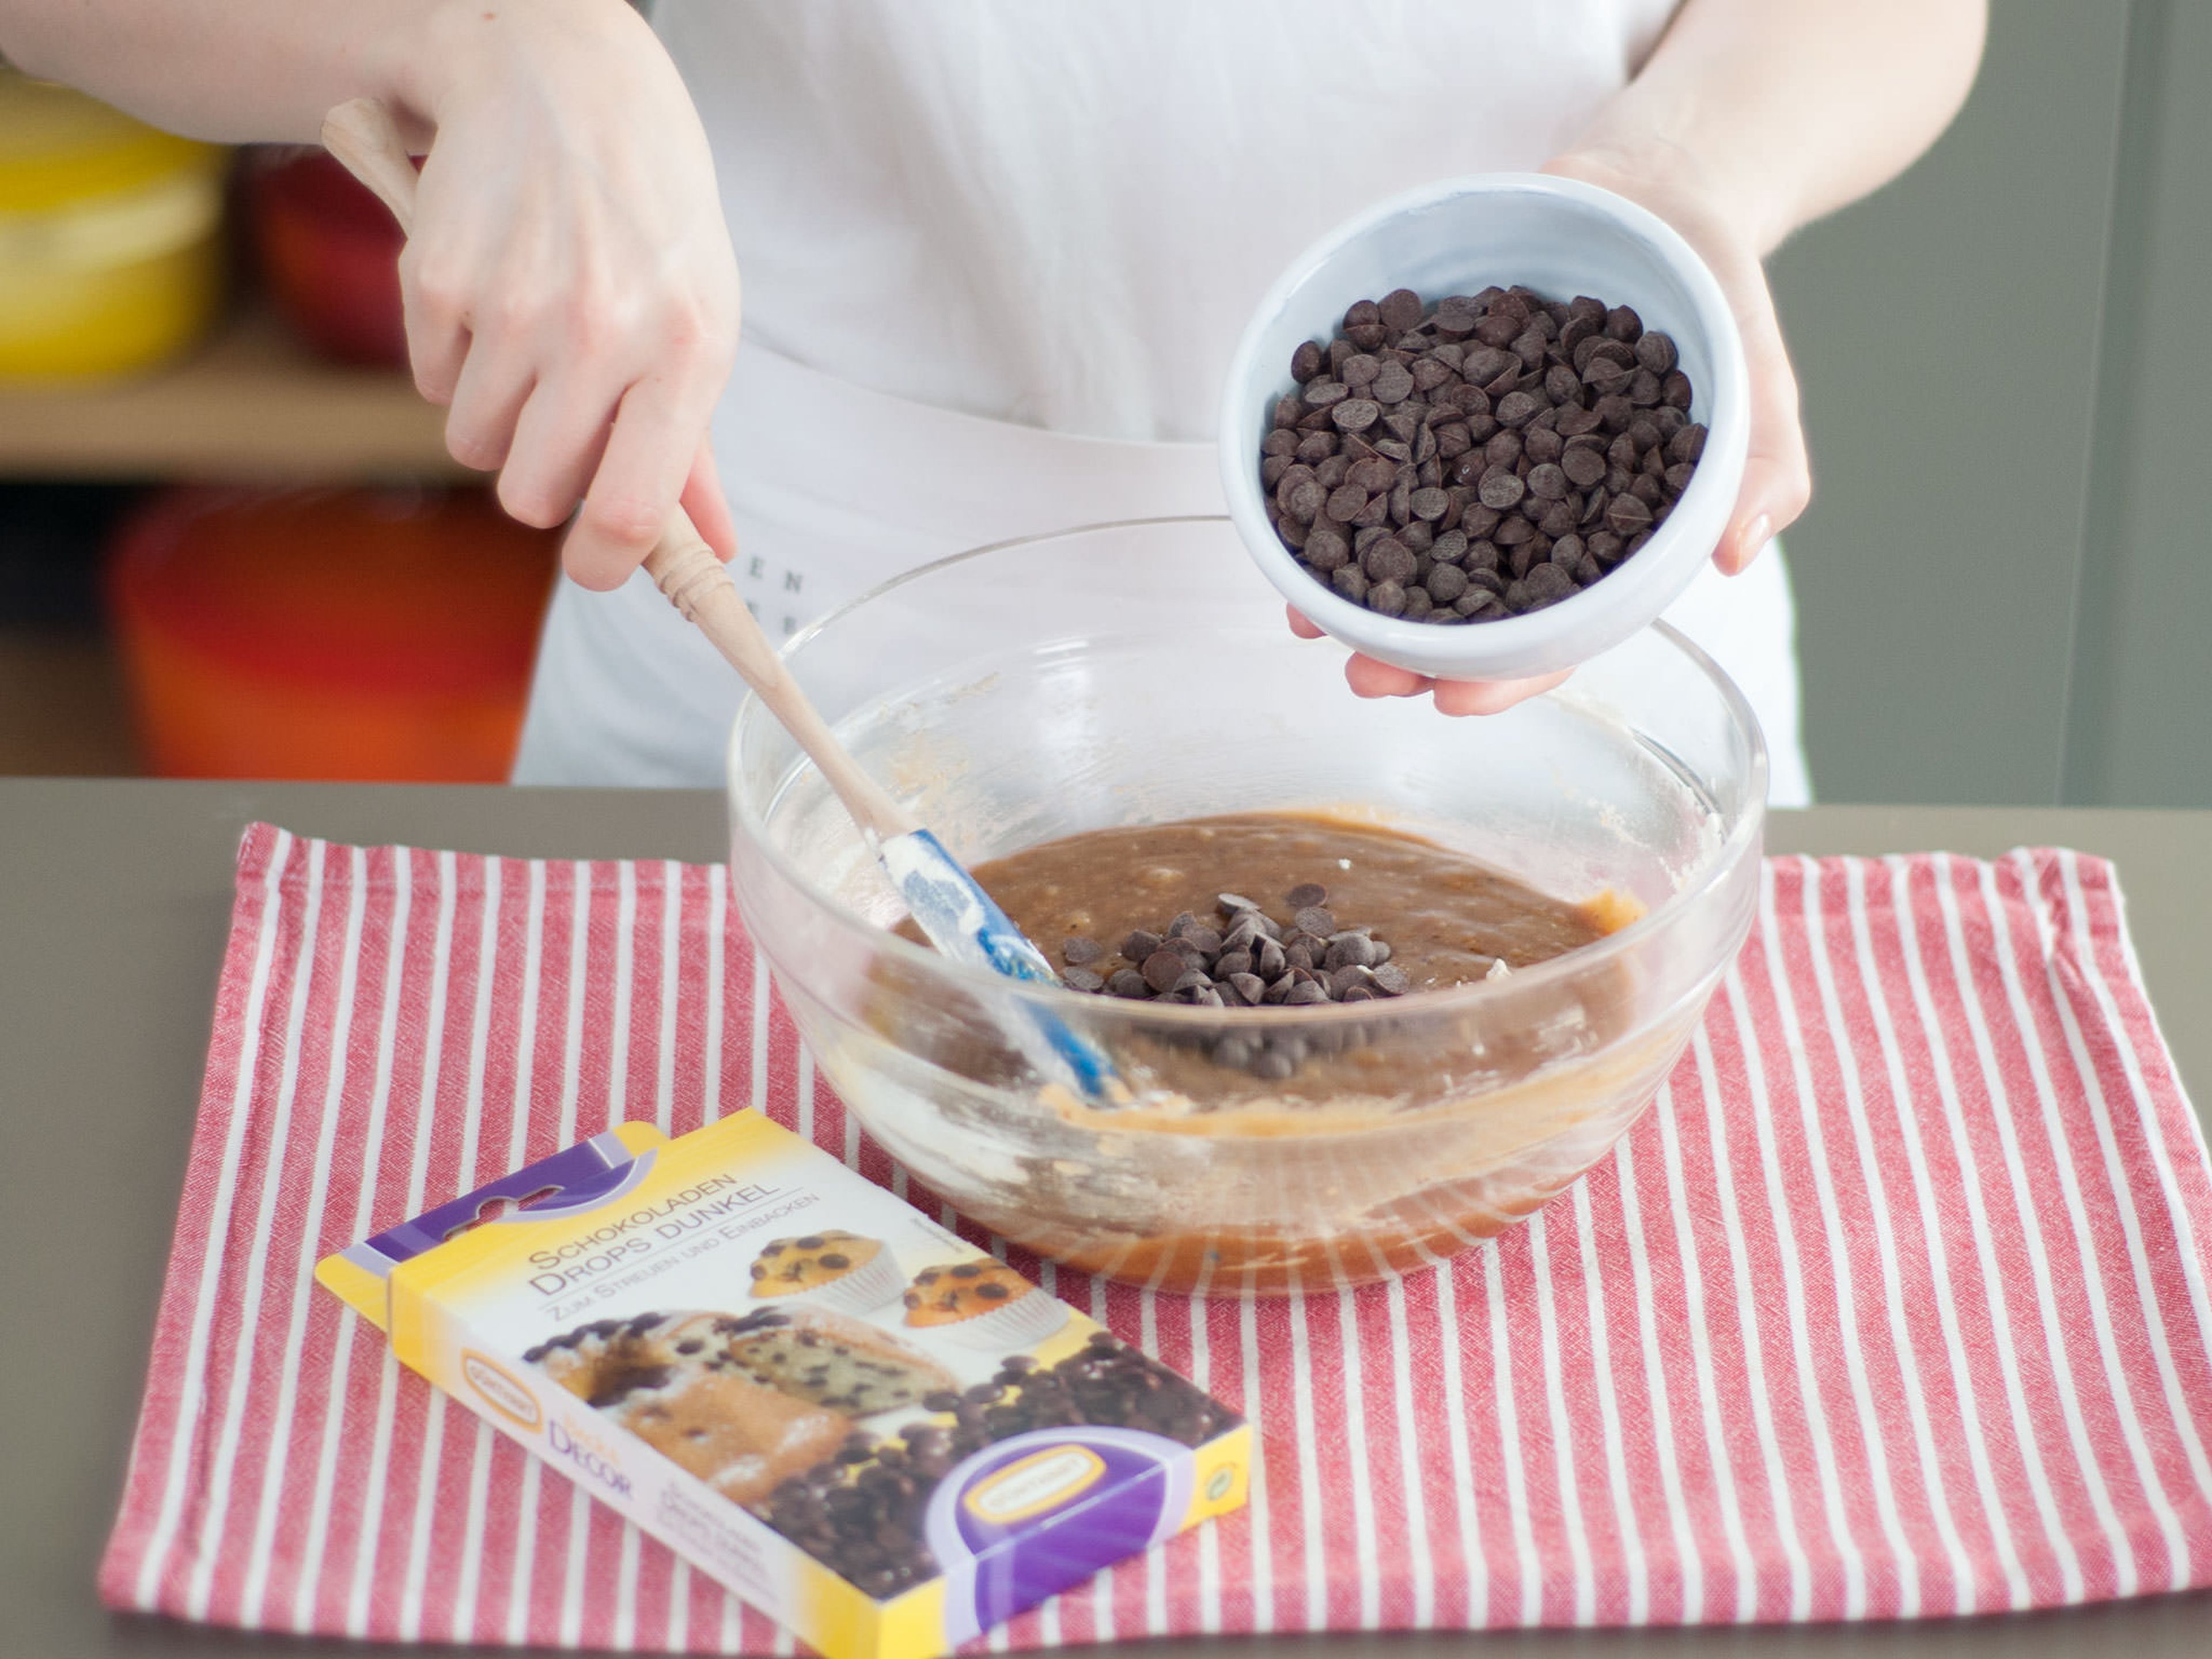 Chop chocolate and add to batter, or simply use chocolate chips. Stir until incorporated.